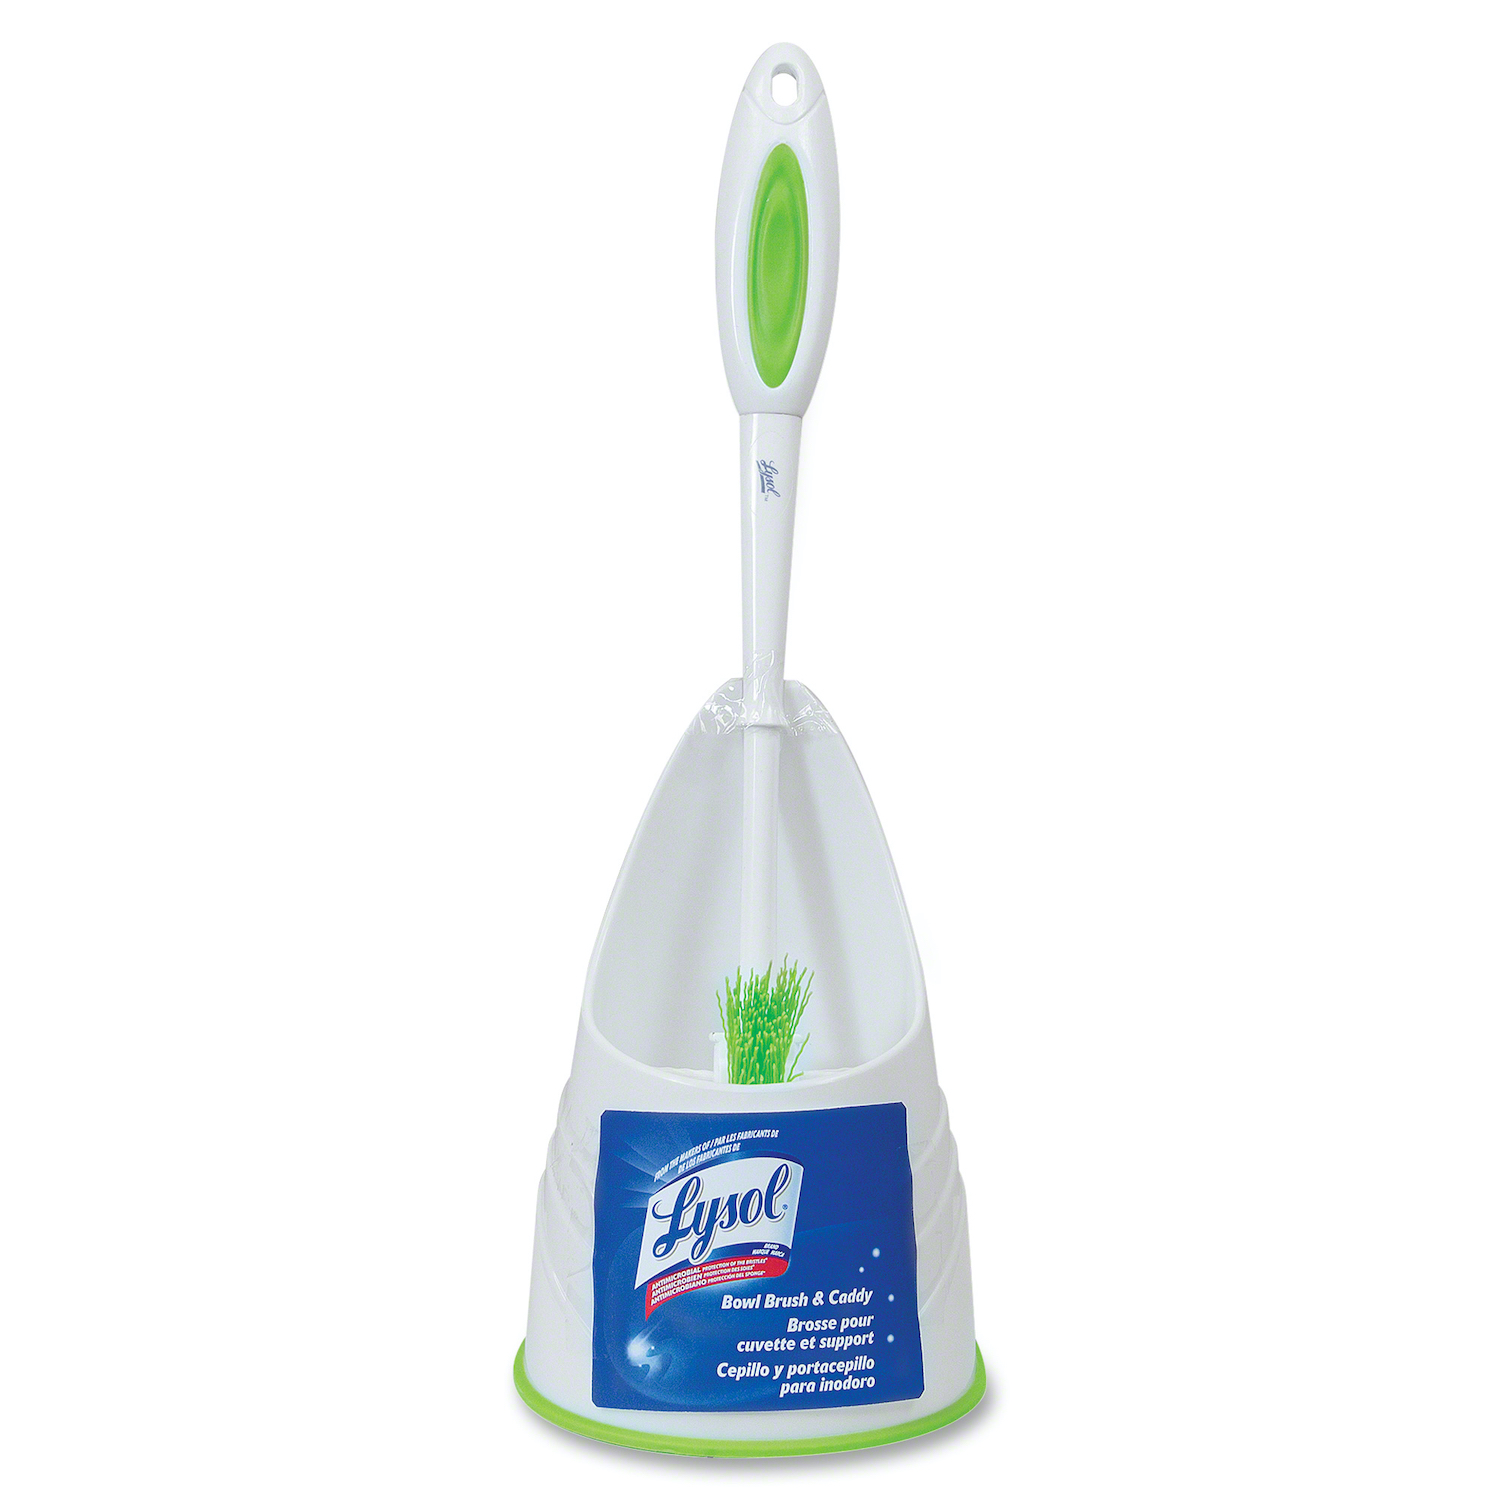 LYSOL BOWL BRUSH RIM EXTENSION AND CADDY TOILET BRUSH